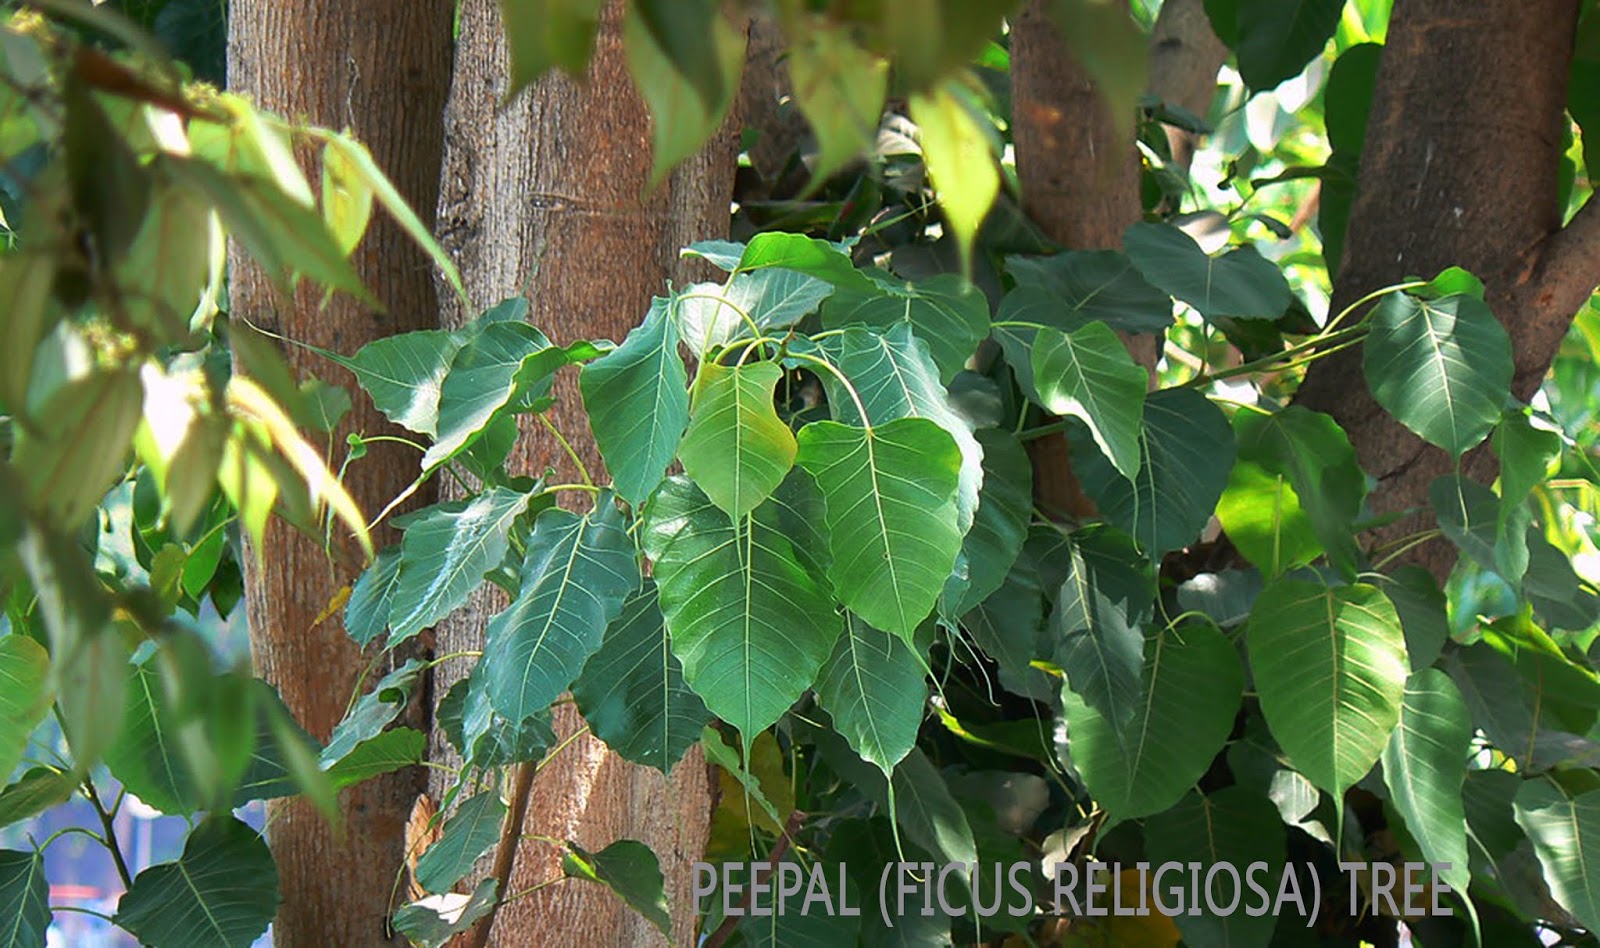 What is the benefit of worshiping the Peepal (Ficus religiosa) tree? Let's know !!